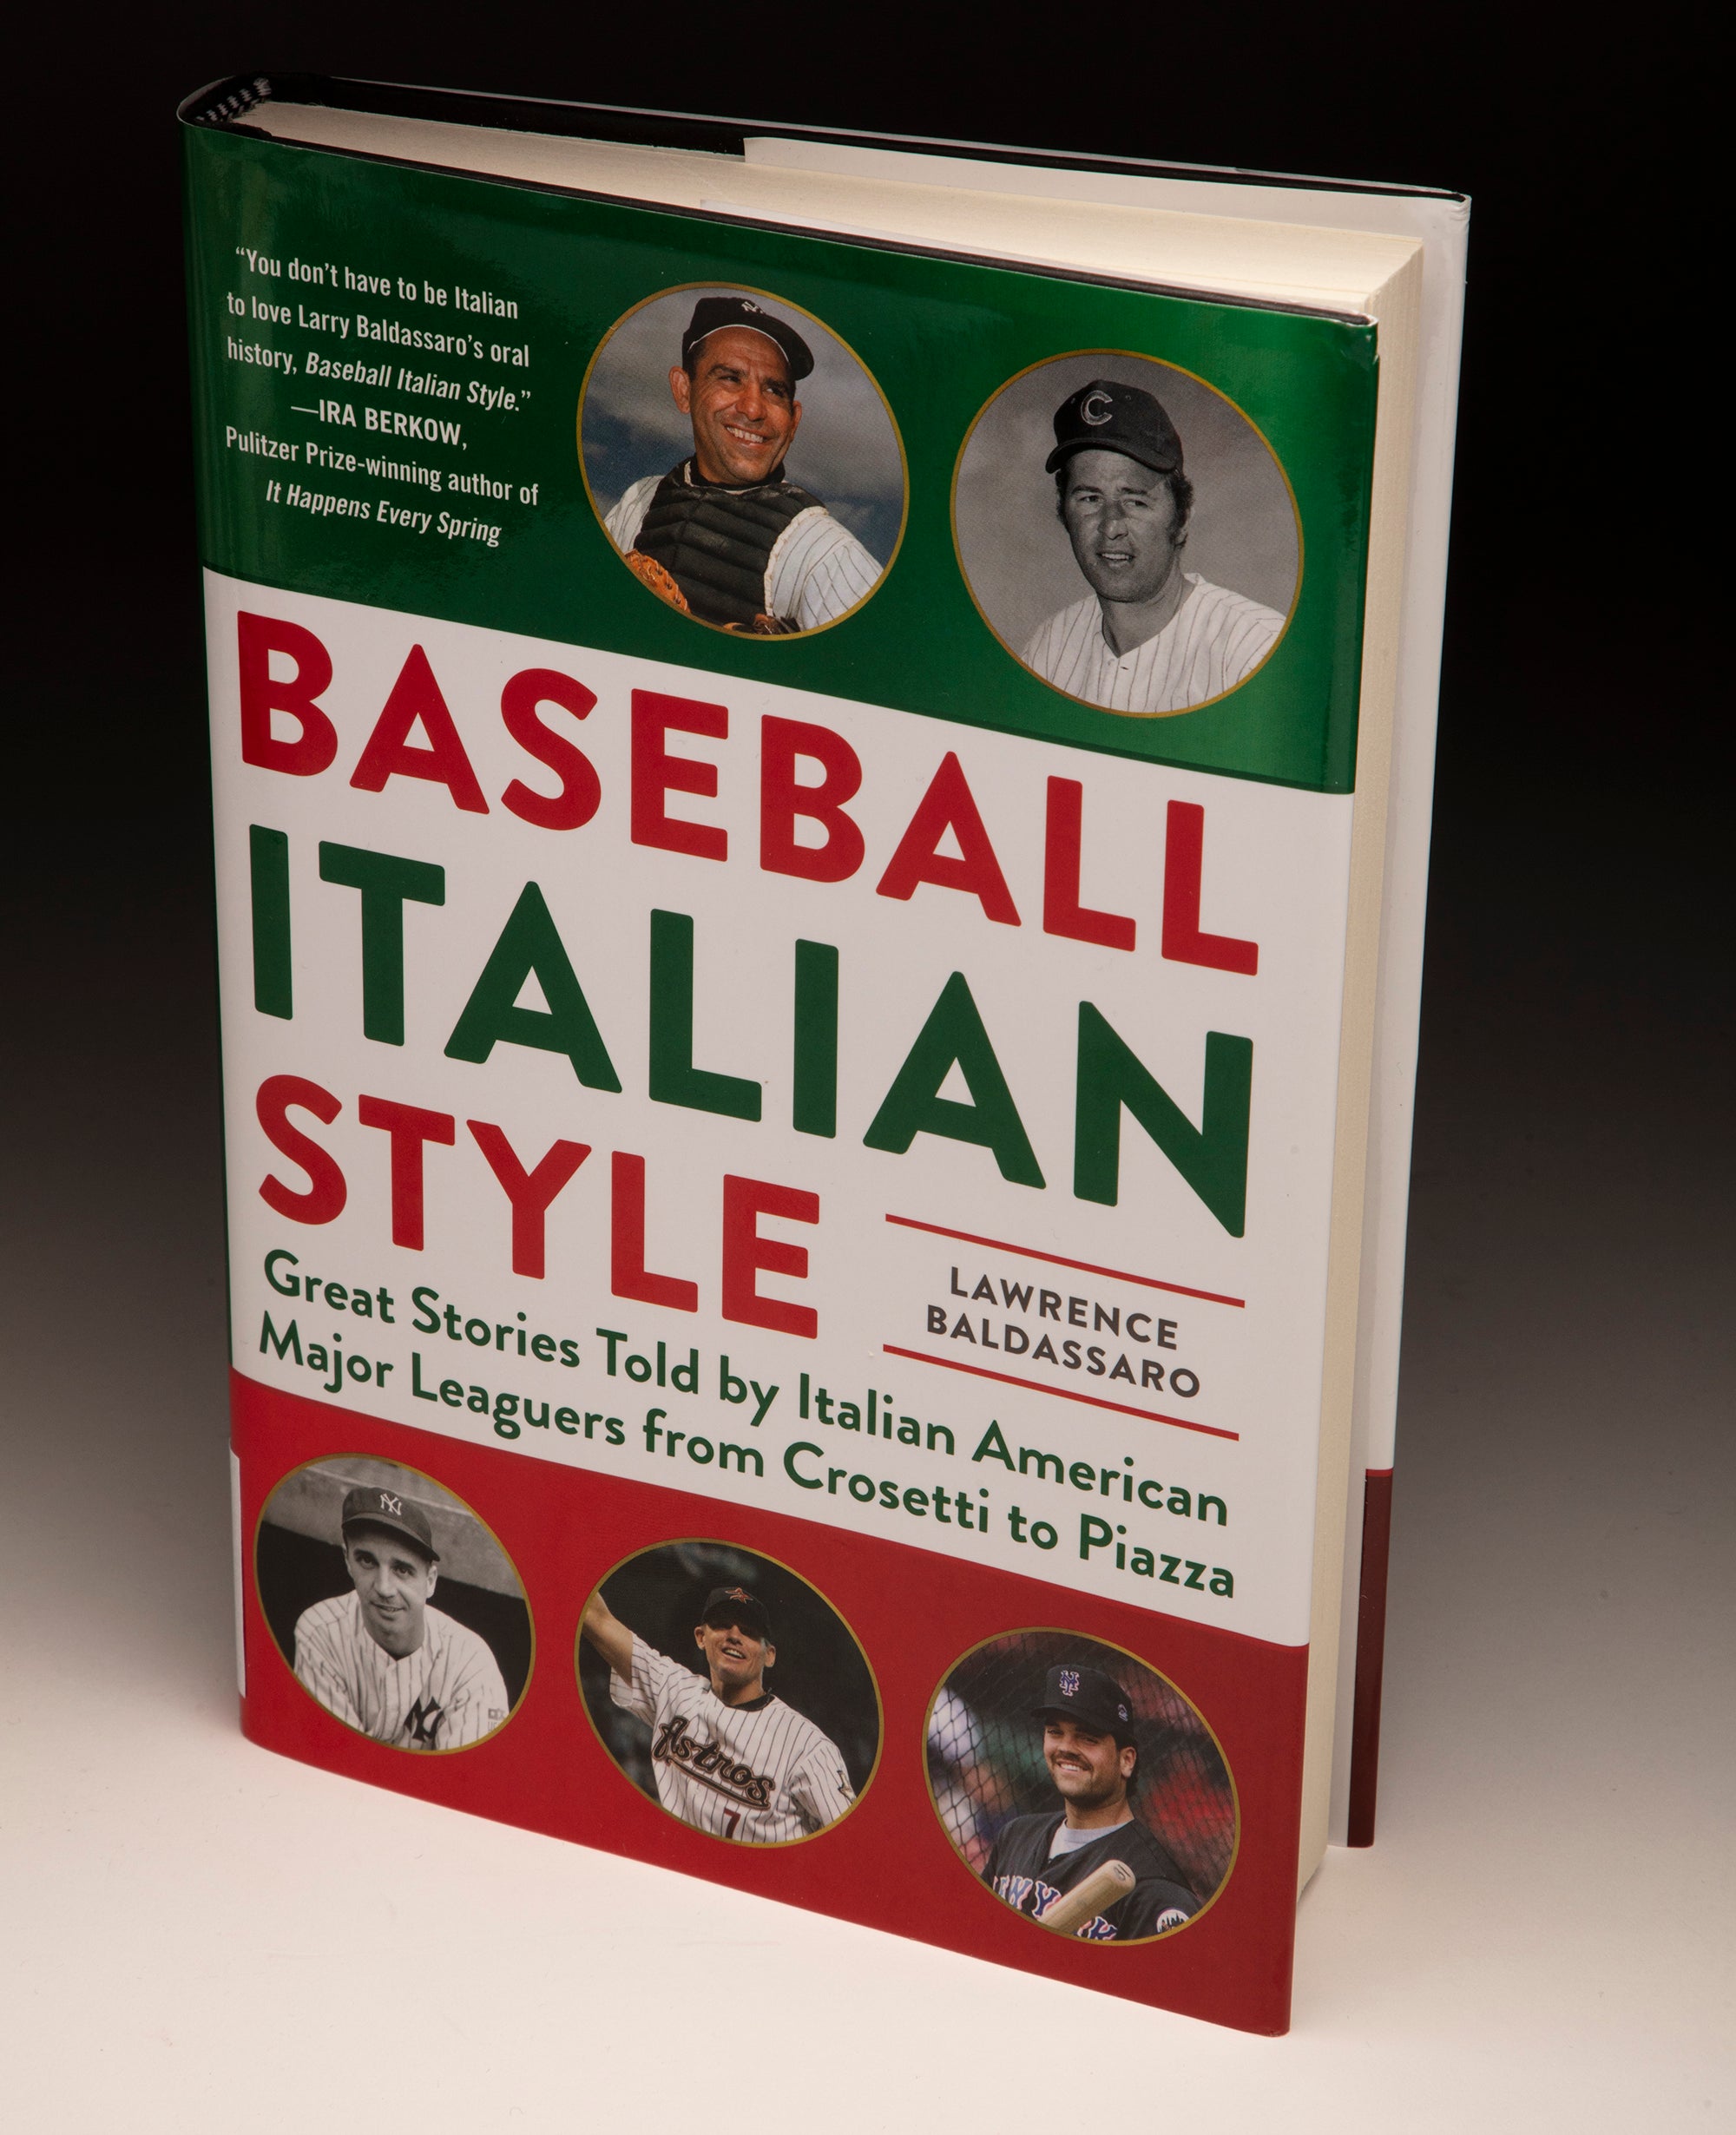 Baldassaro interview collection details rich history of Italian Americans in baseball